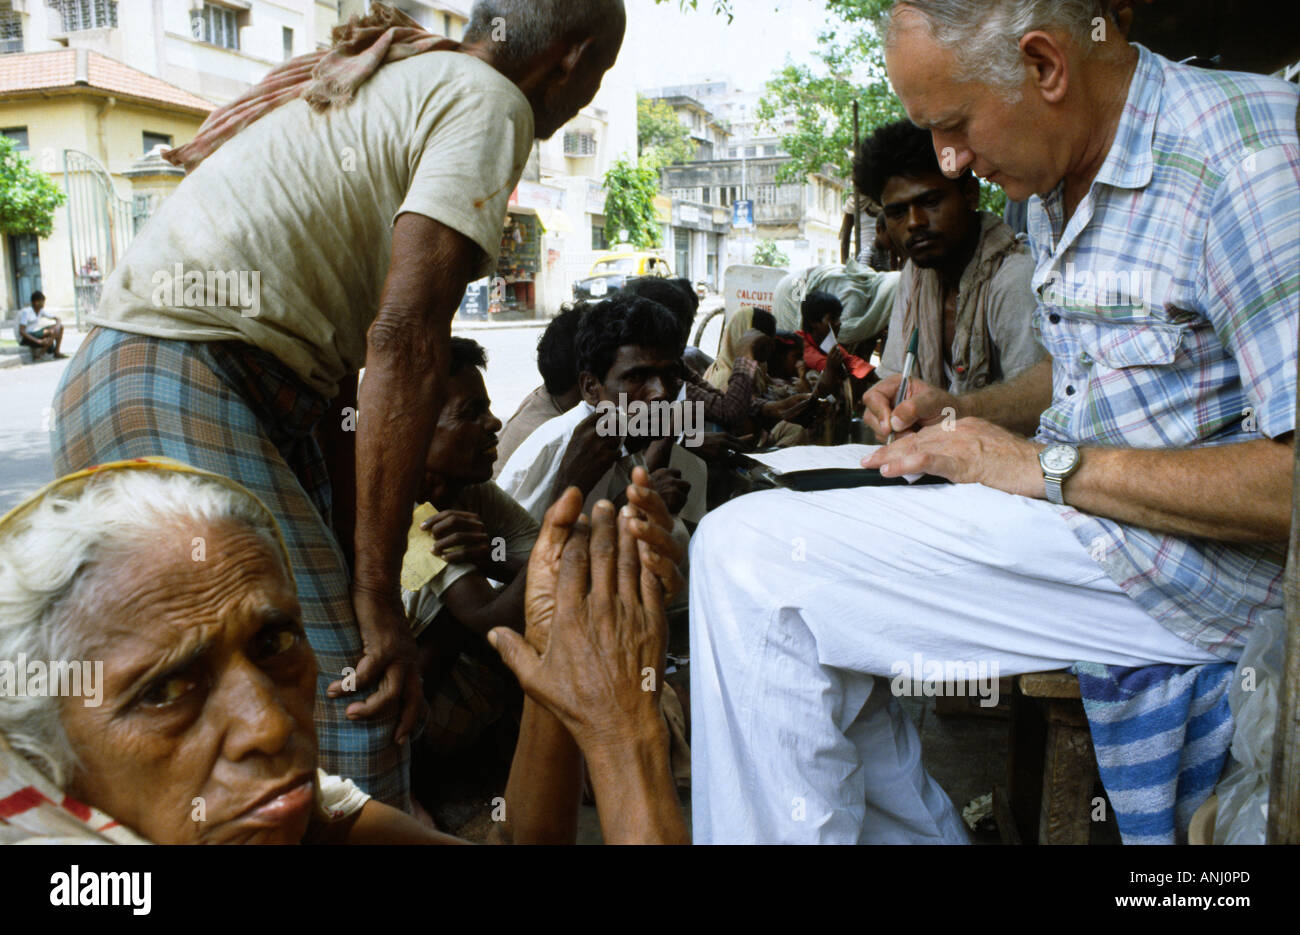 Dr. Jack Preger, founder of NGO Calcutta Rescue, treating slum dwellers on the streets of Kolkata, the only free healthcare available to them. India Stock Photo